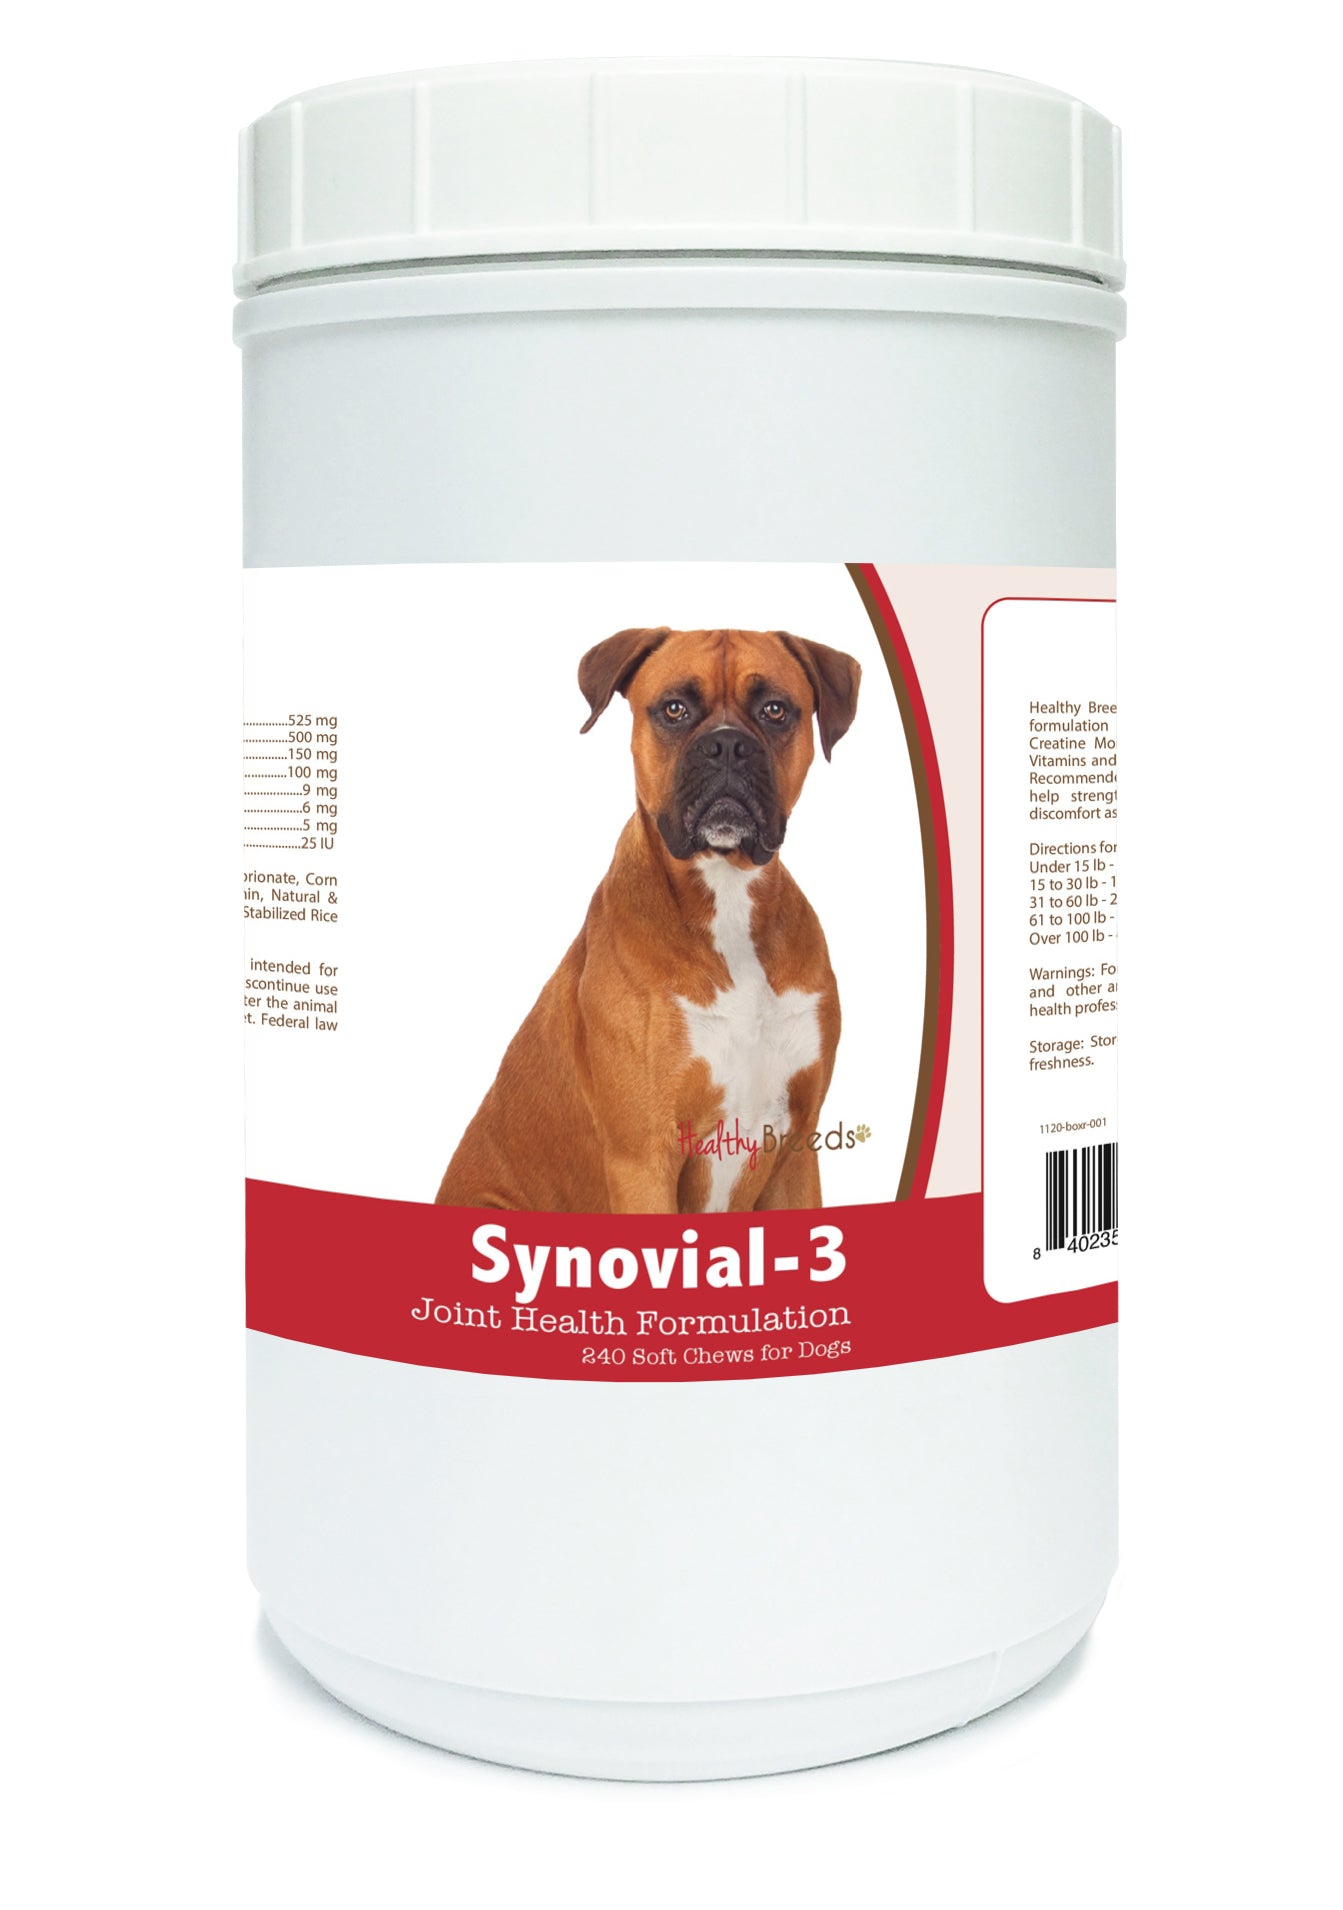 Boxer Synovial-3 Joint Health Formulation Soft Chews 240 Count